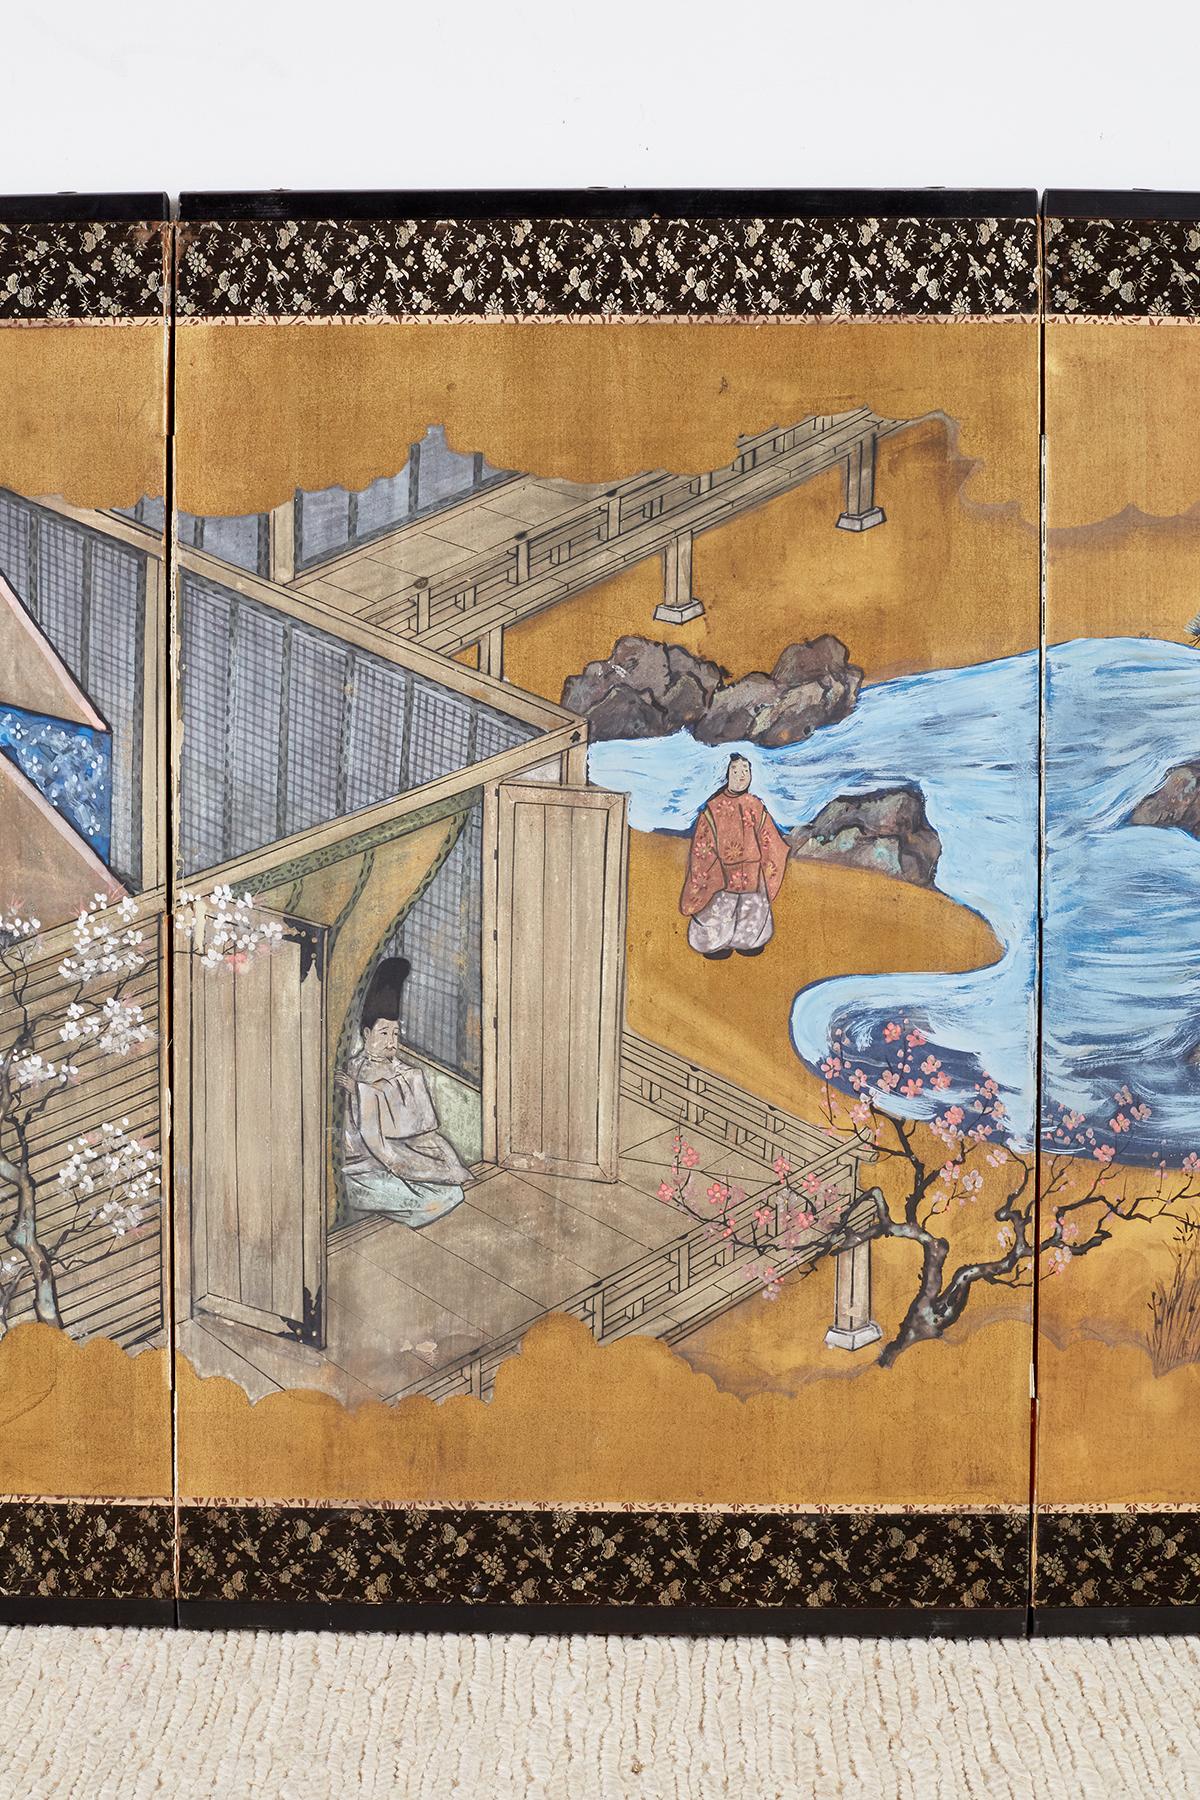 20th Century Japanese Four-Panel Screen Tales of Genji Episode